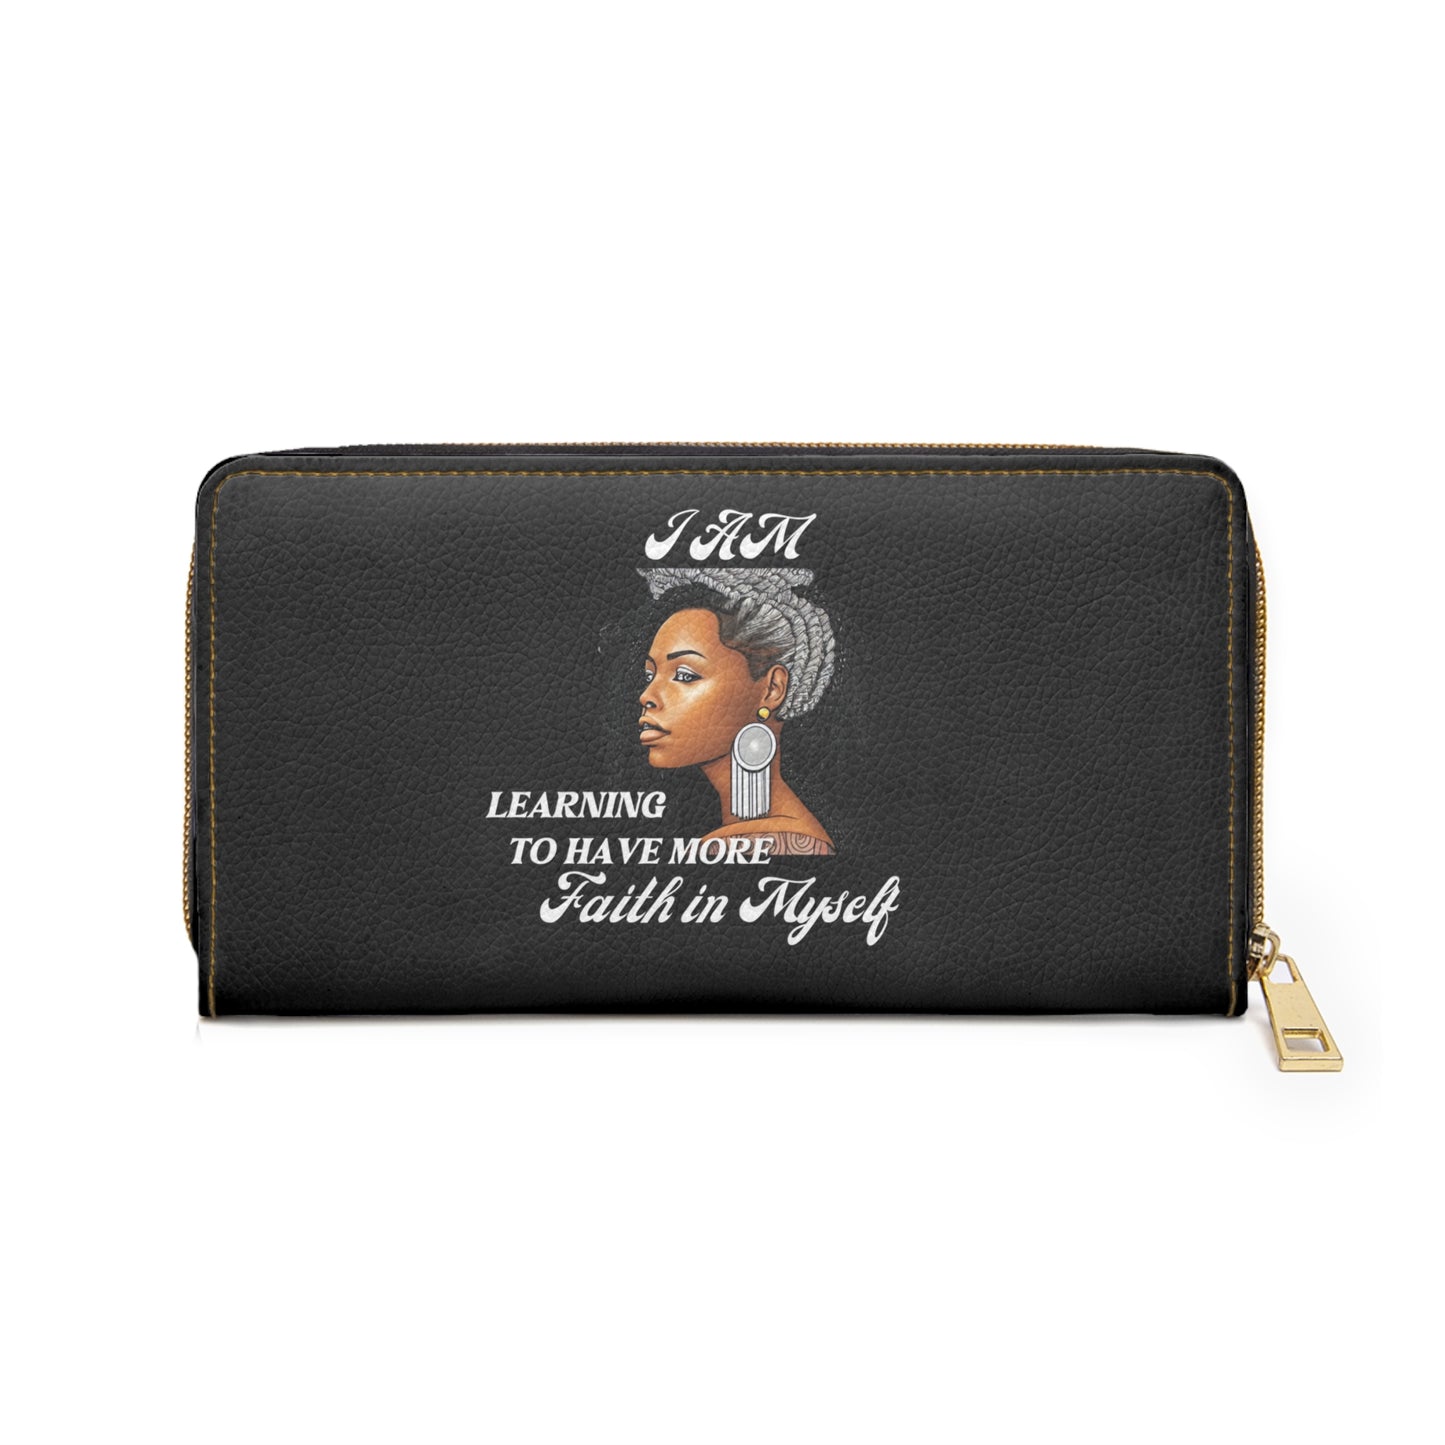 " Faith In Myself" -Positive Afrocentric Affirmation Vegan Leather Wallet Bag- Empower Your Style and Self-Love; Black Wallet